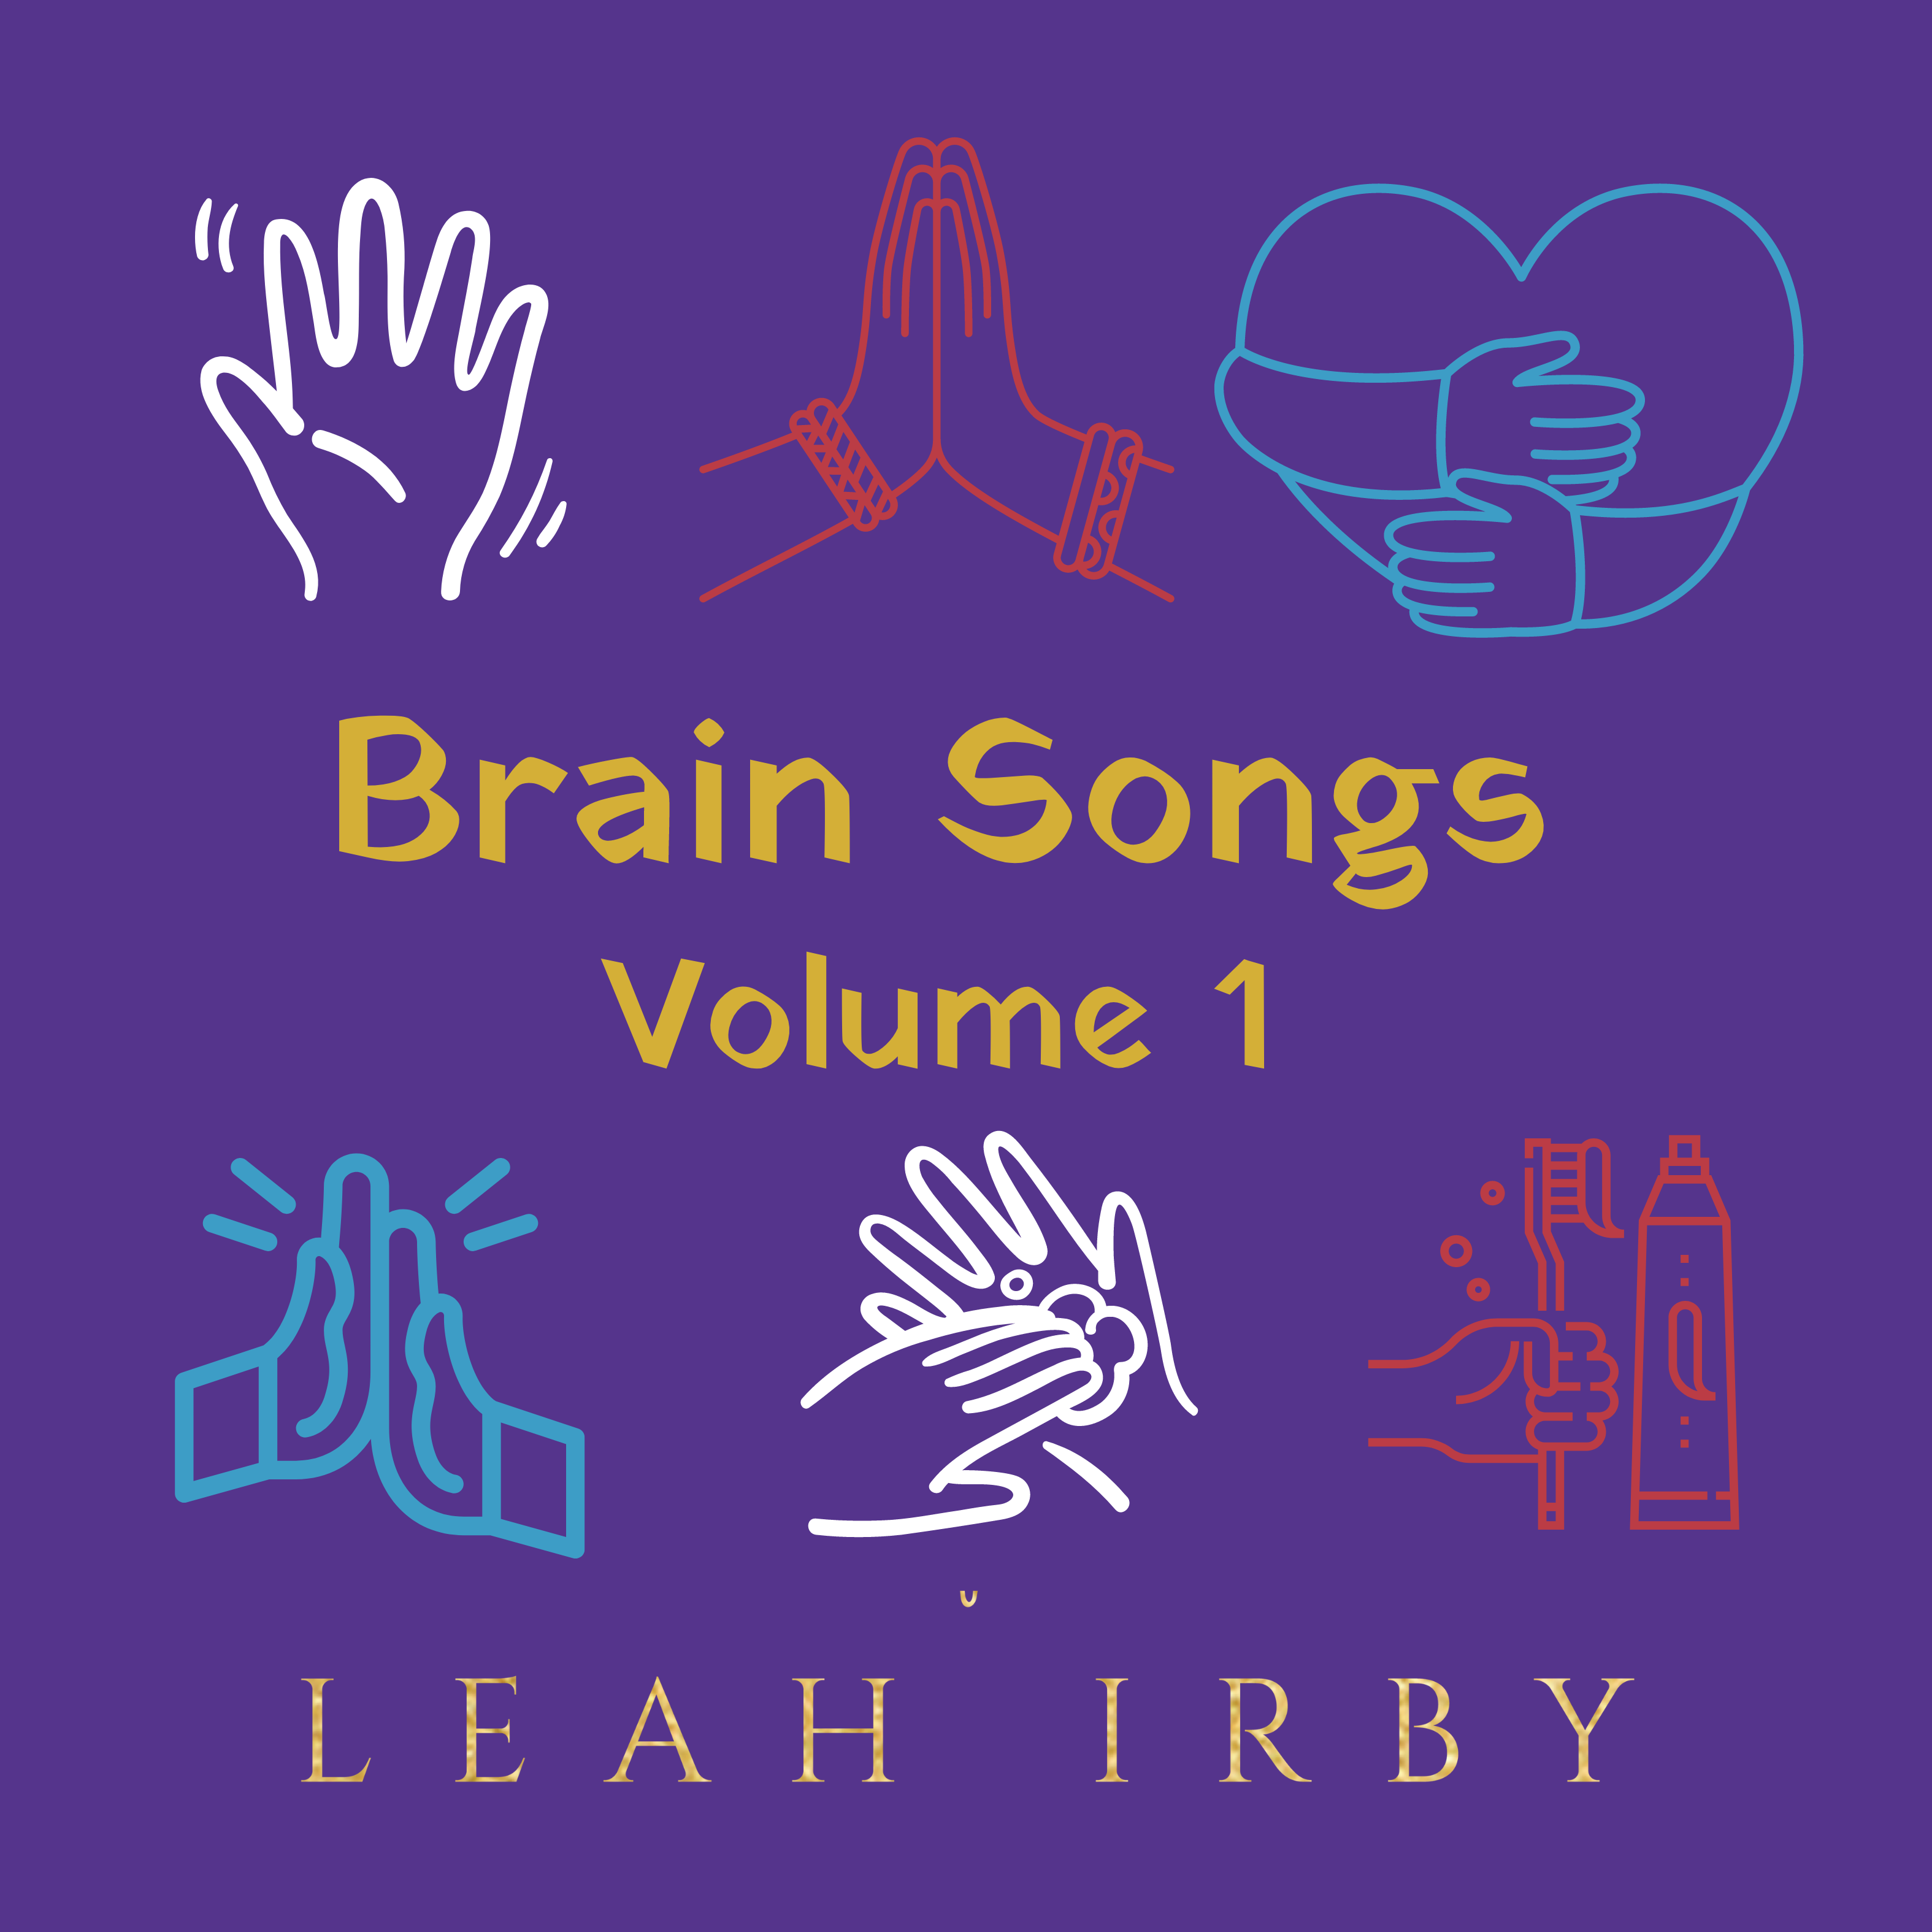 Music Album Cover Brain Songs Volume 1 by Leah Irby with a purple background and icons of hand wave, namaste, hug, high five, hand washing, brushing teeth.